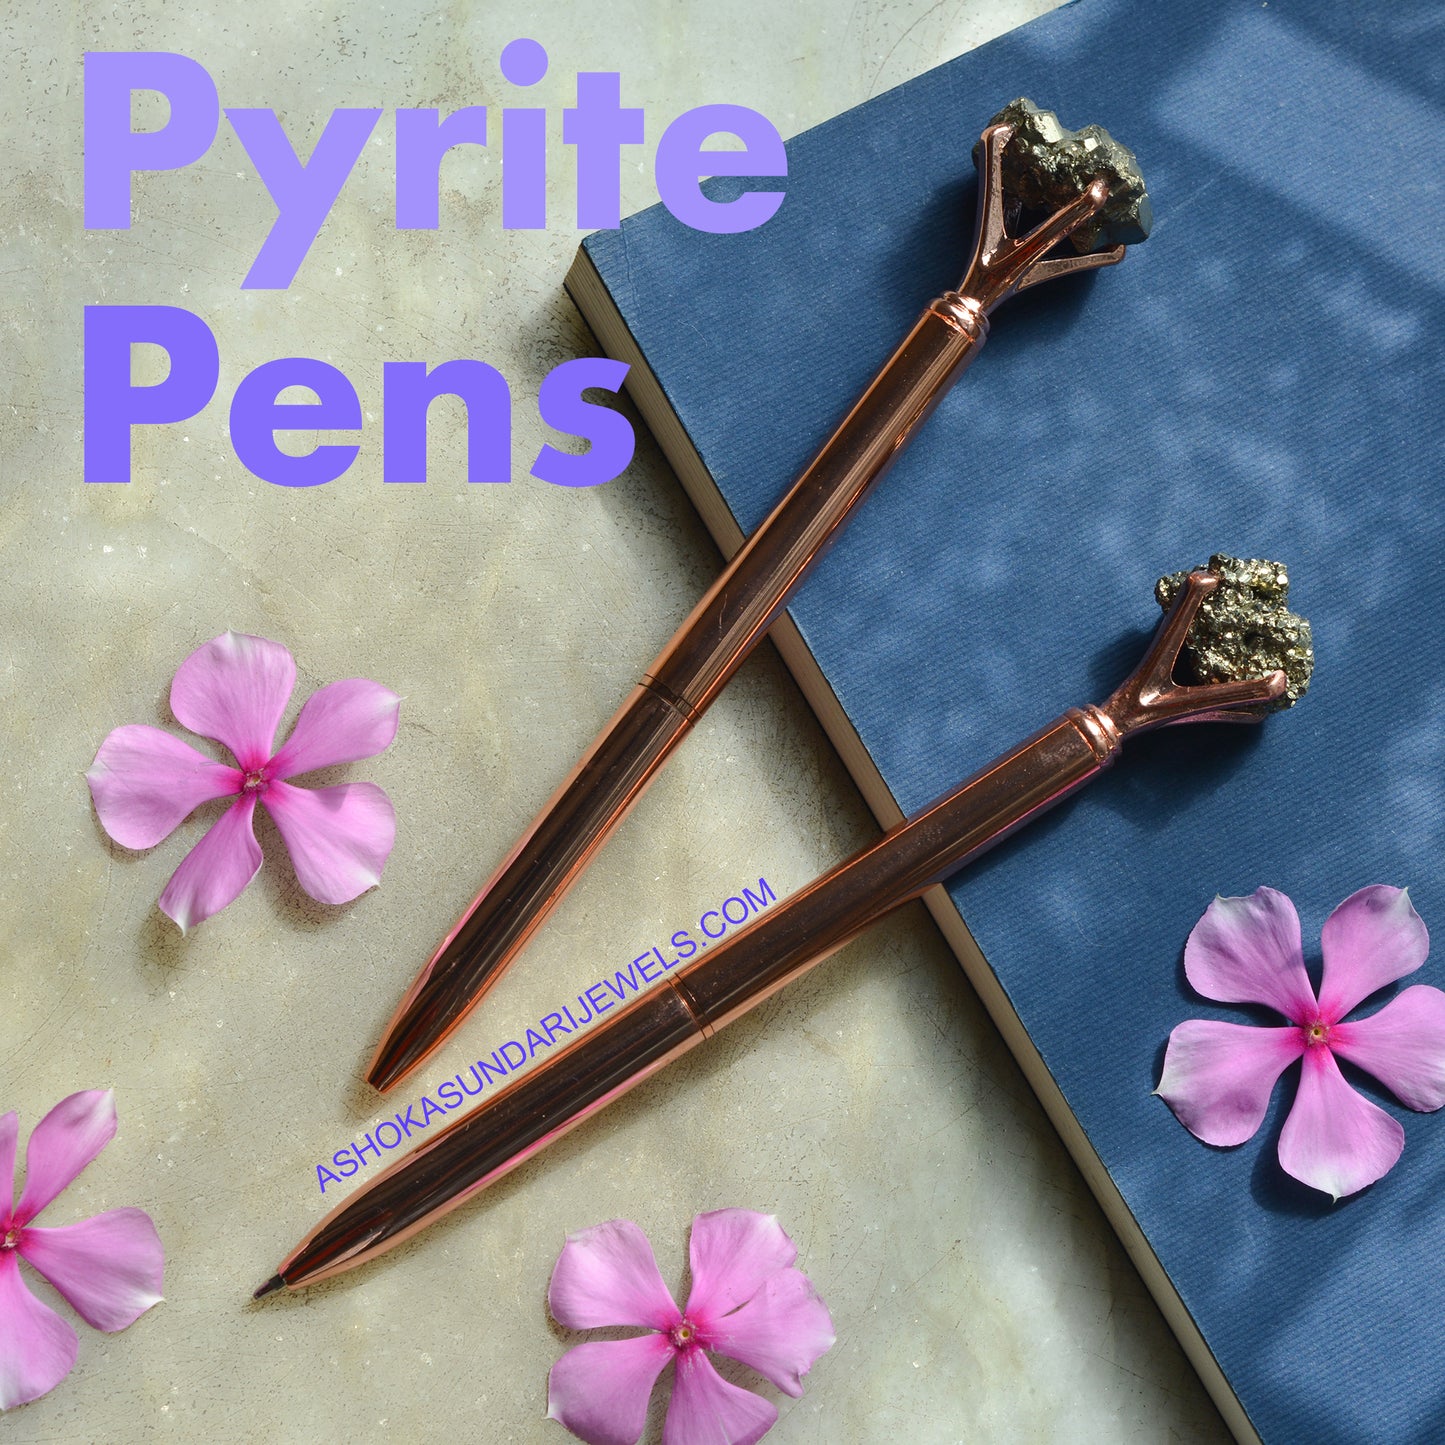 Pyrite Crystal Pen - PACK OF 2 Couples and Friends Pack